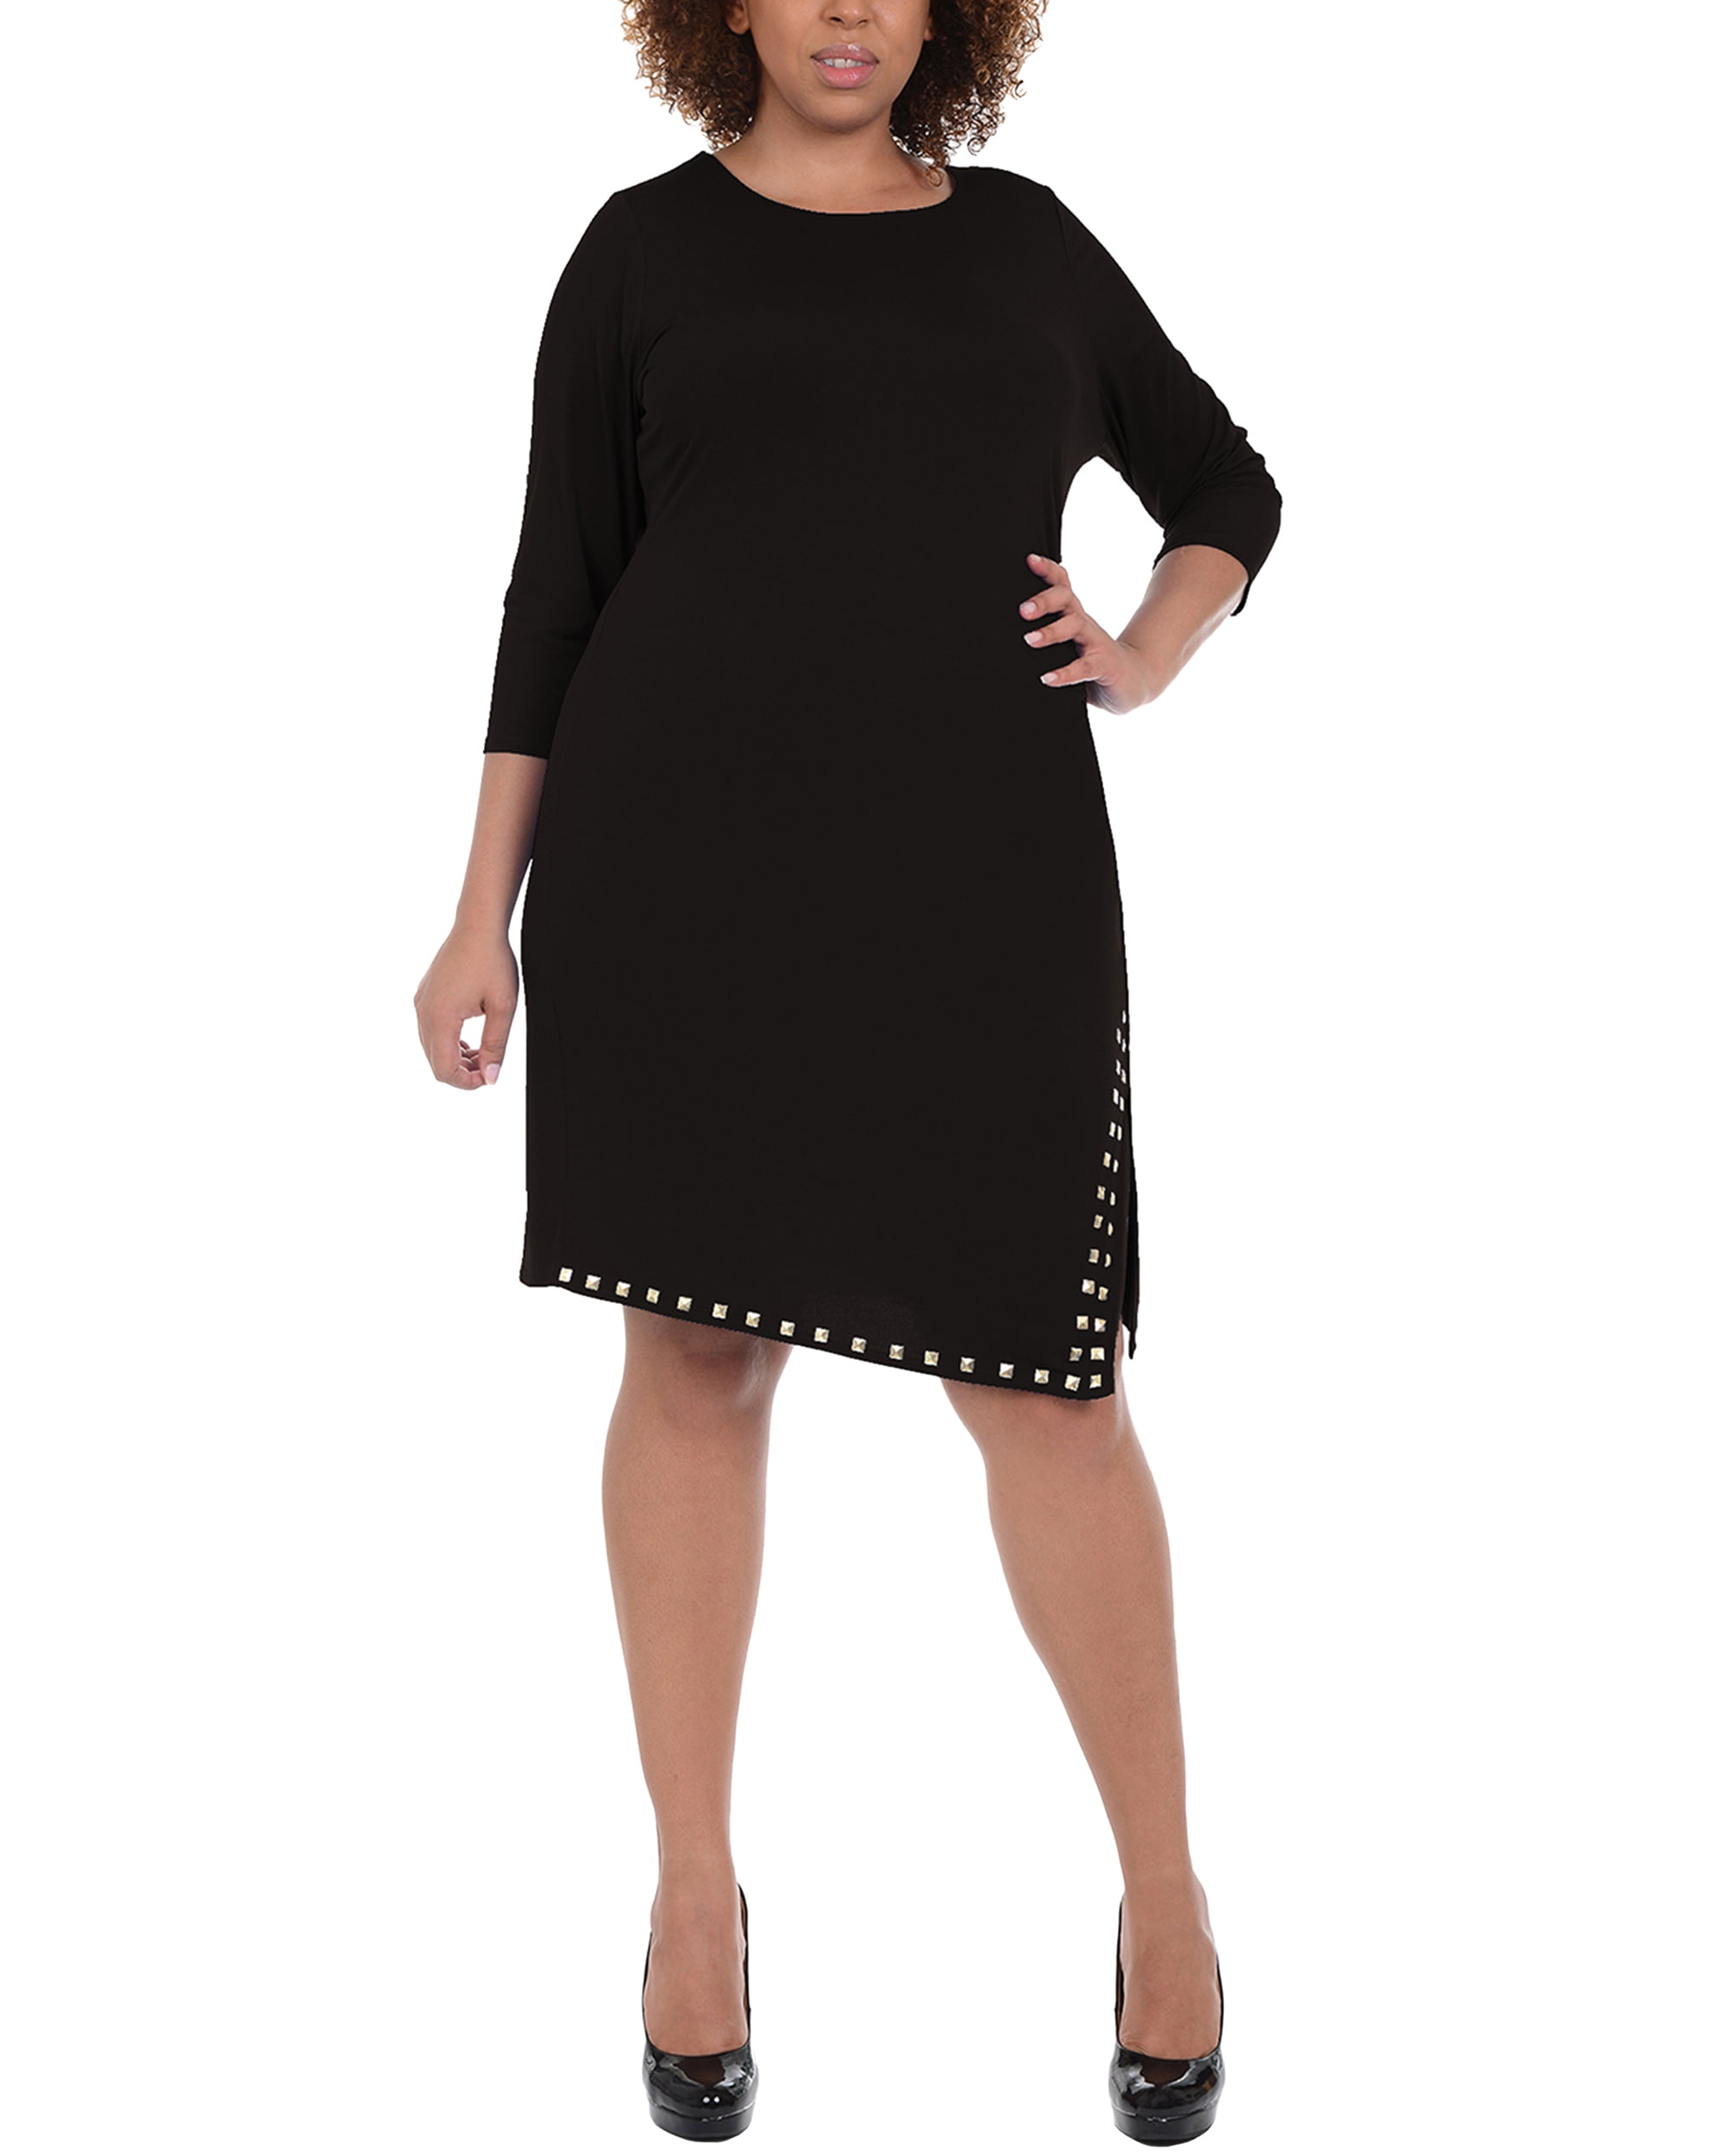 NY Collection Womens Plus Size 3/4 Sleeve Fit and Flare Dress with Solid Top and Printed Skirt